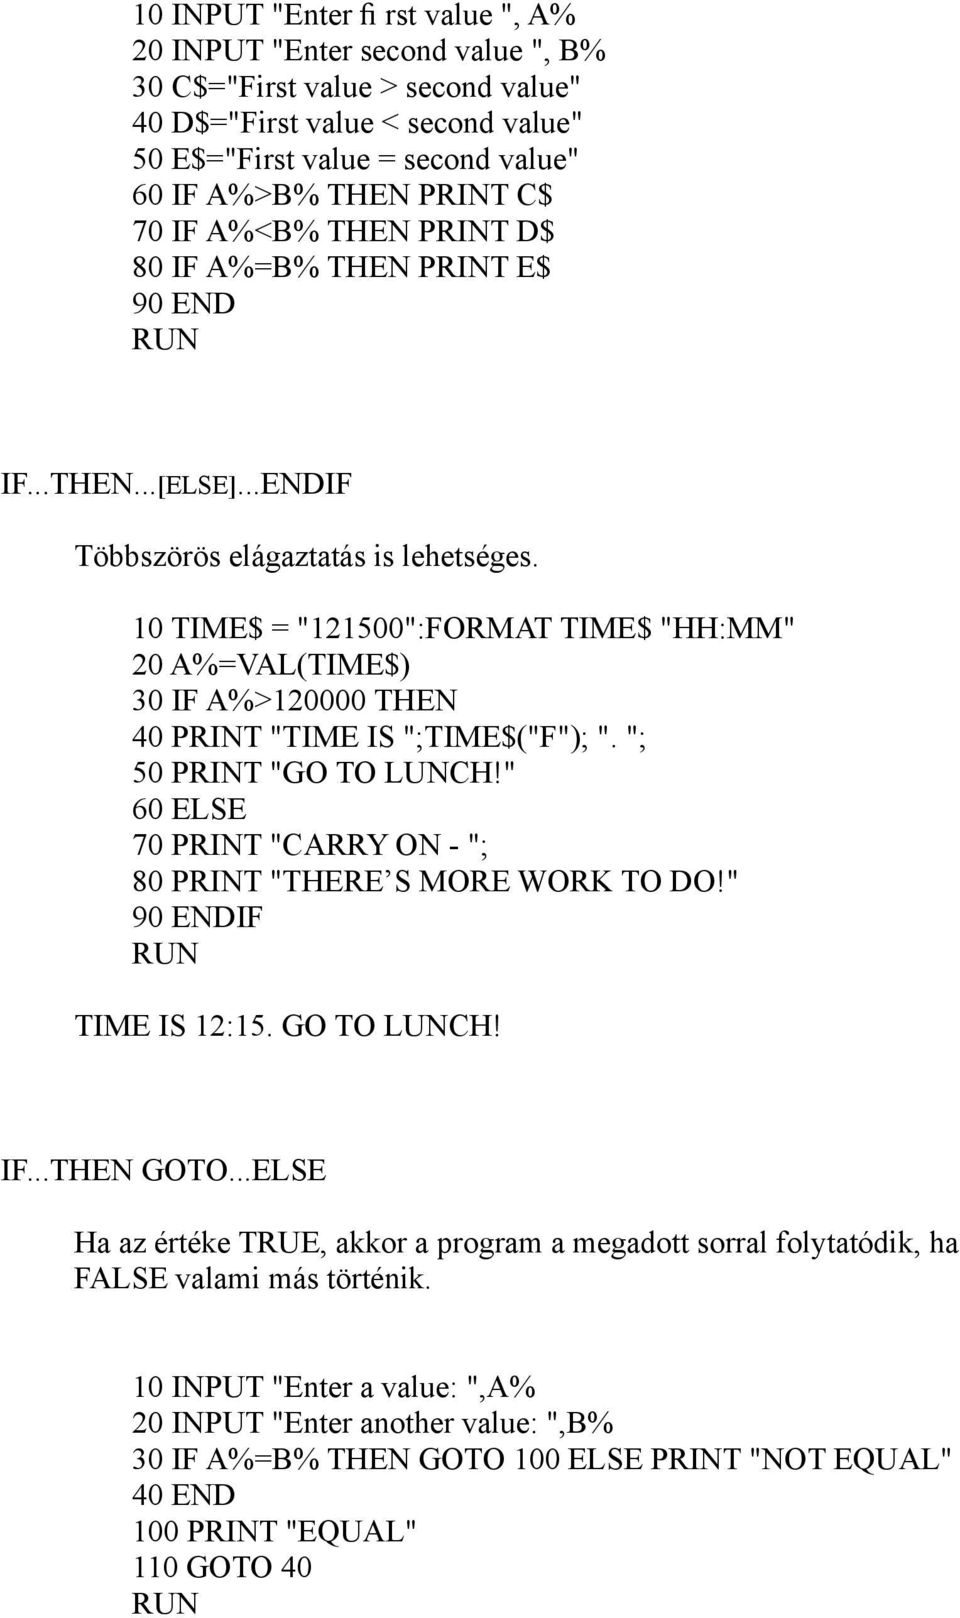 10 TIME$ = "121500":FORMAT TIME$ "HH:MM" 20 A%=VAL(TIME$) 30 IF A%>120000 THEN 40 PRINT "TIME IS ";TIME$("F"); ". "; 50 PRINT "GO TO LUNCH!